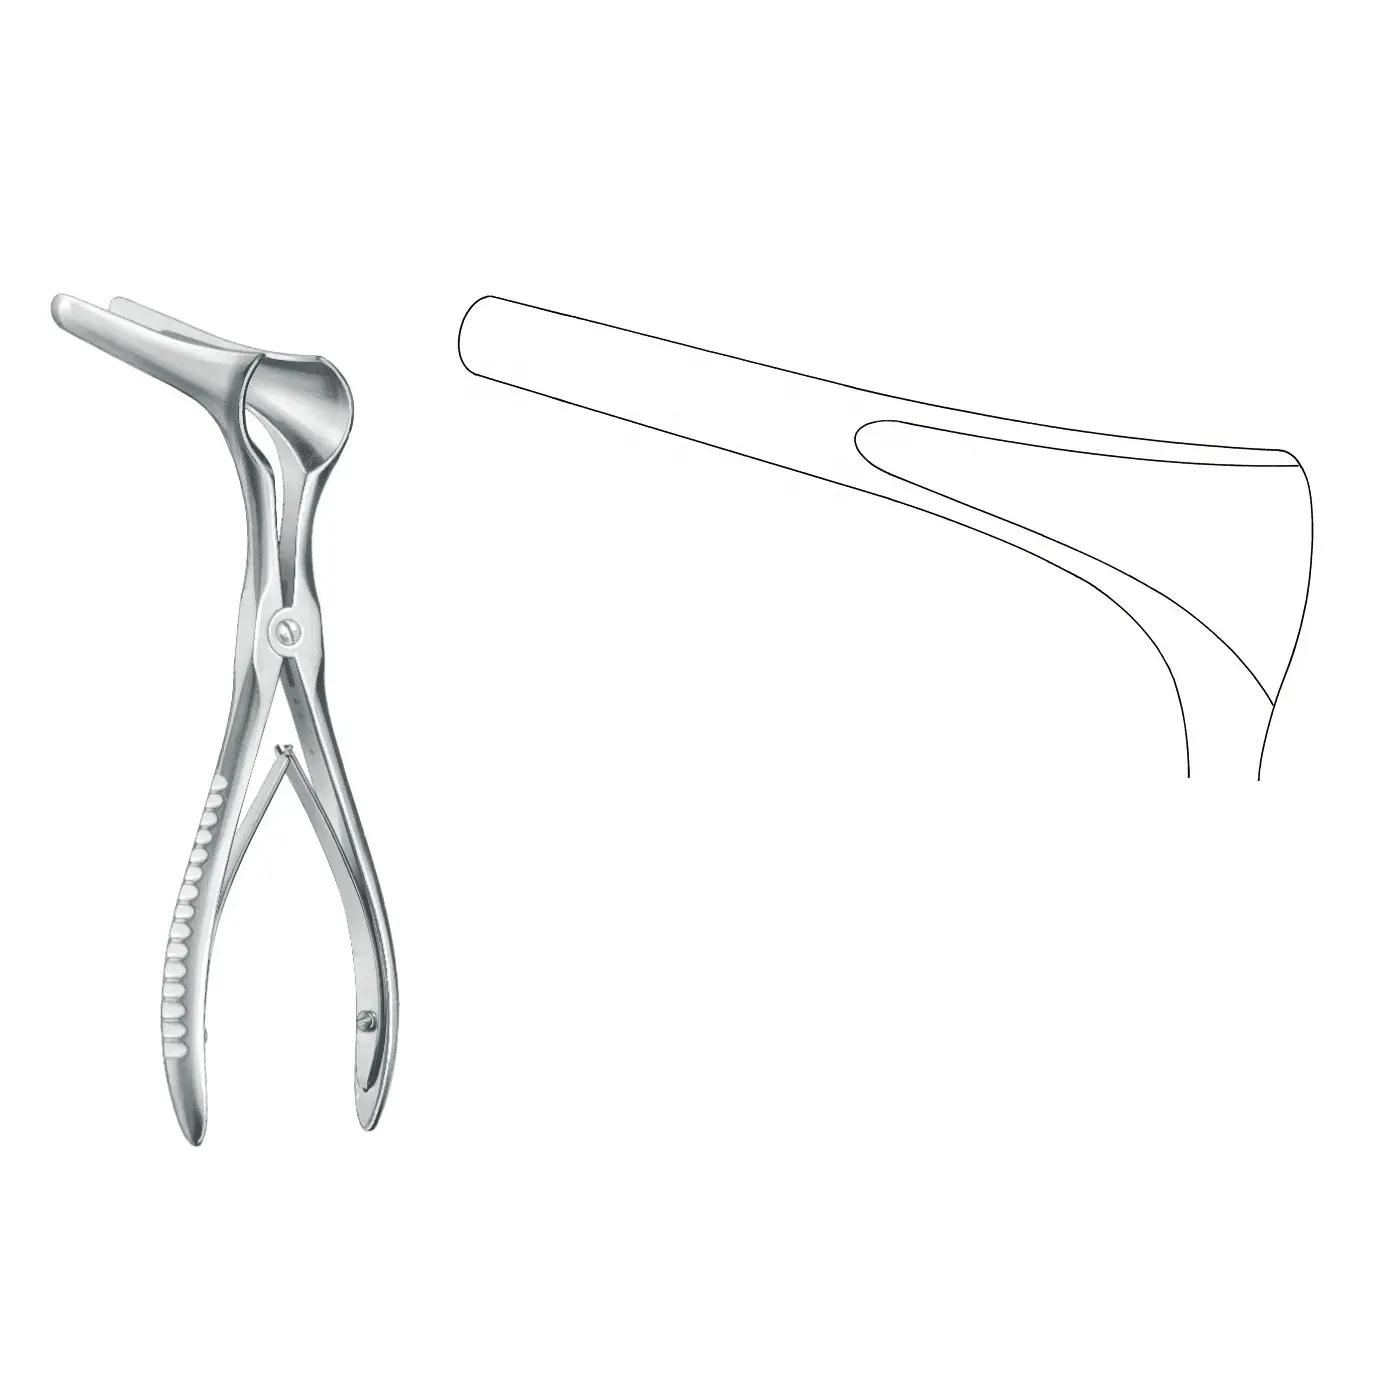 Killian Nasal Specula/Nasal Speculum/Available All Sizes Nasal Specula Surgical Instrument BY SIGAL MEDCO